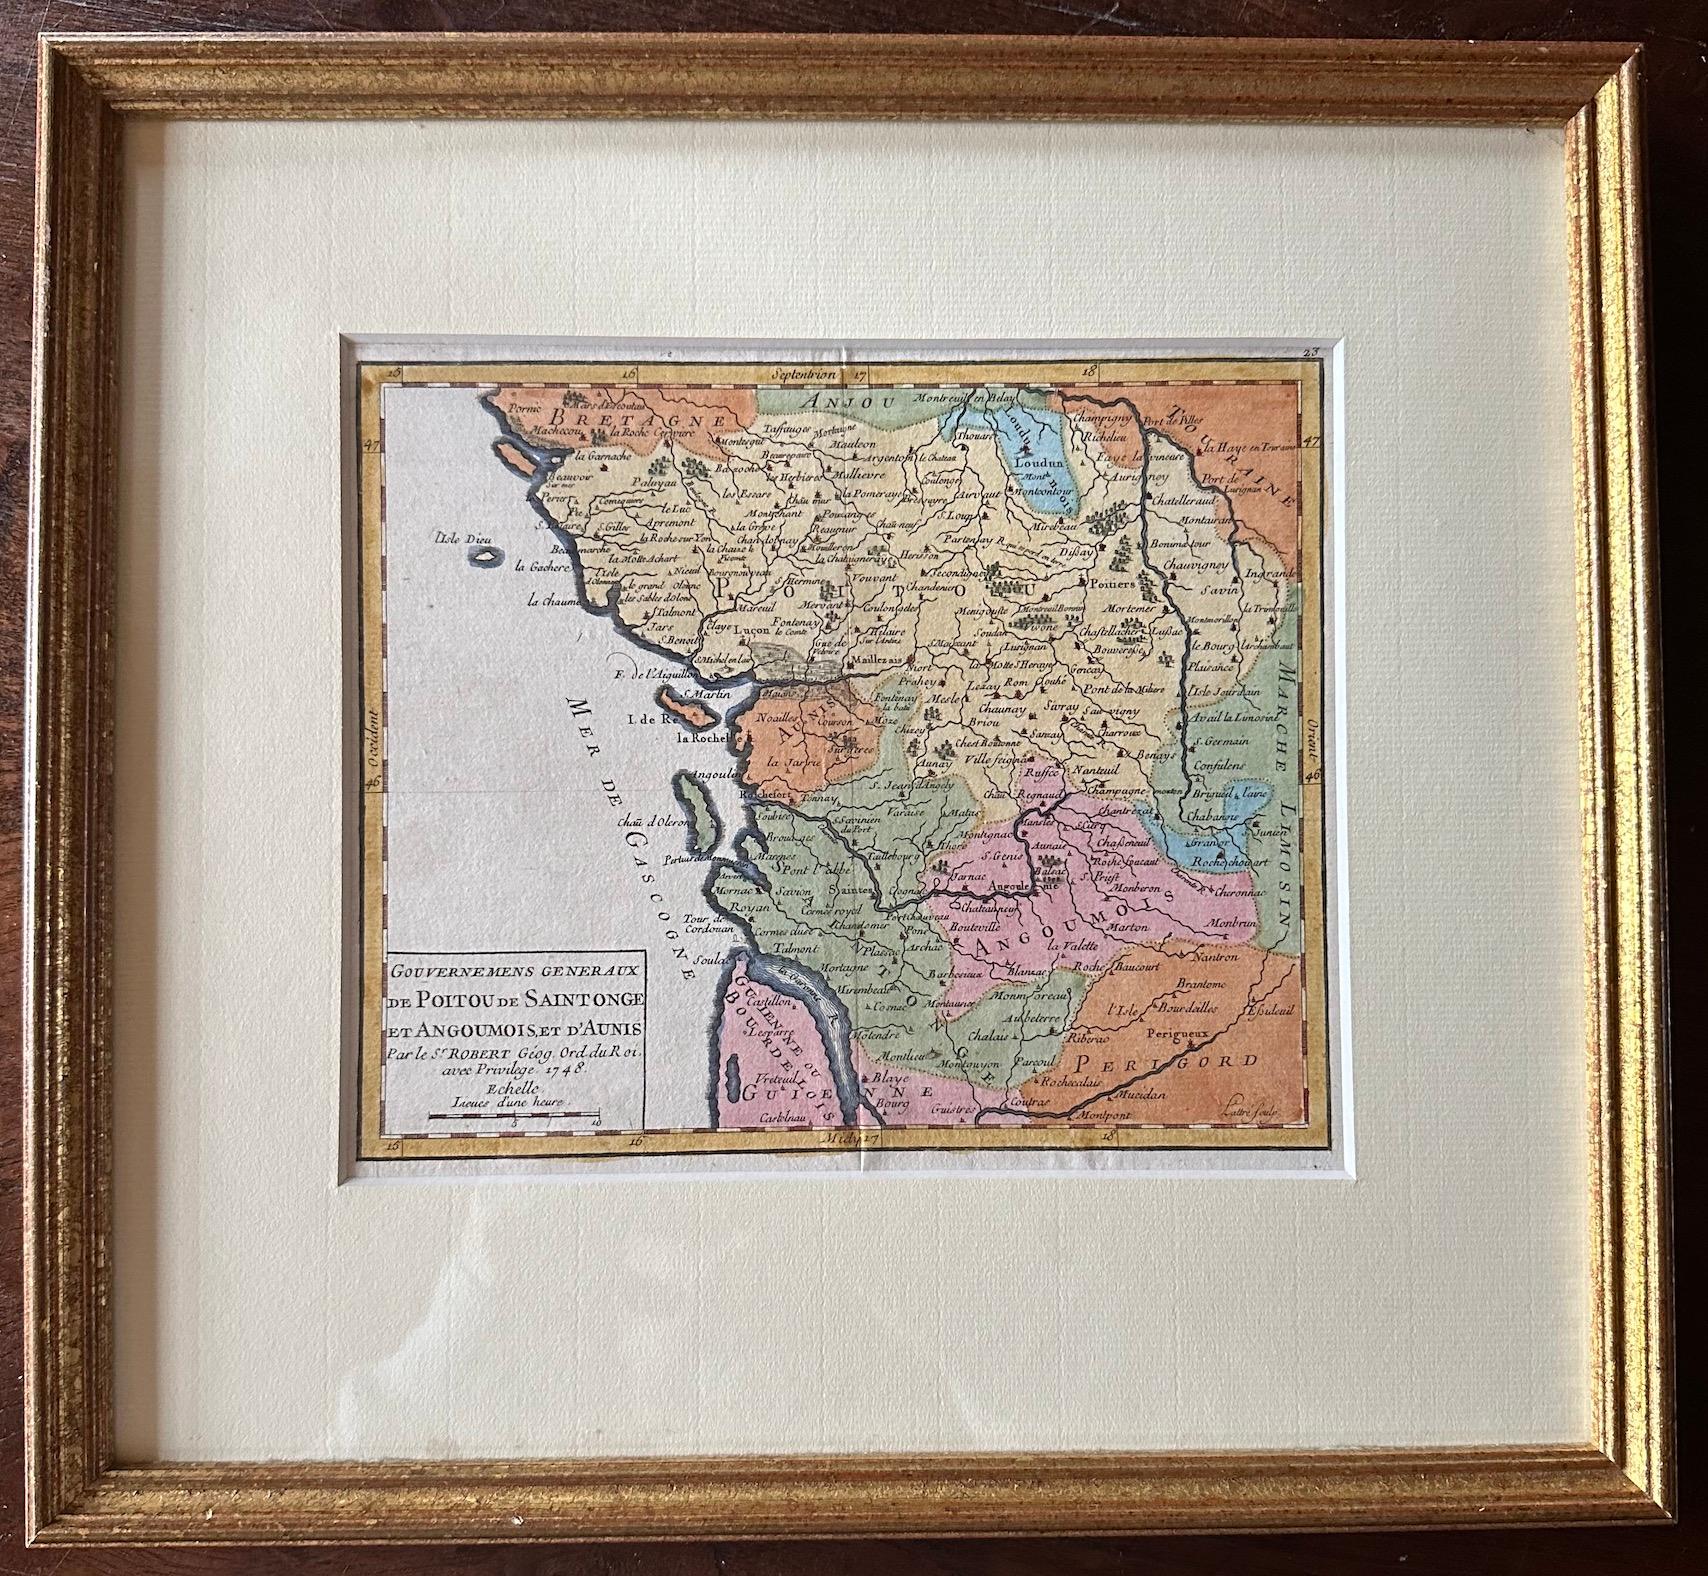 A nicely framed and hand-coloured decorative map titled 